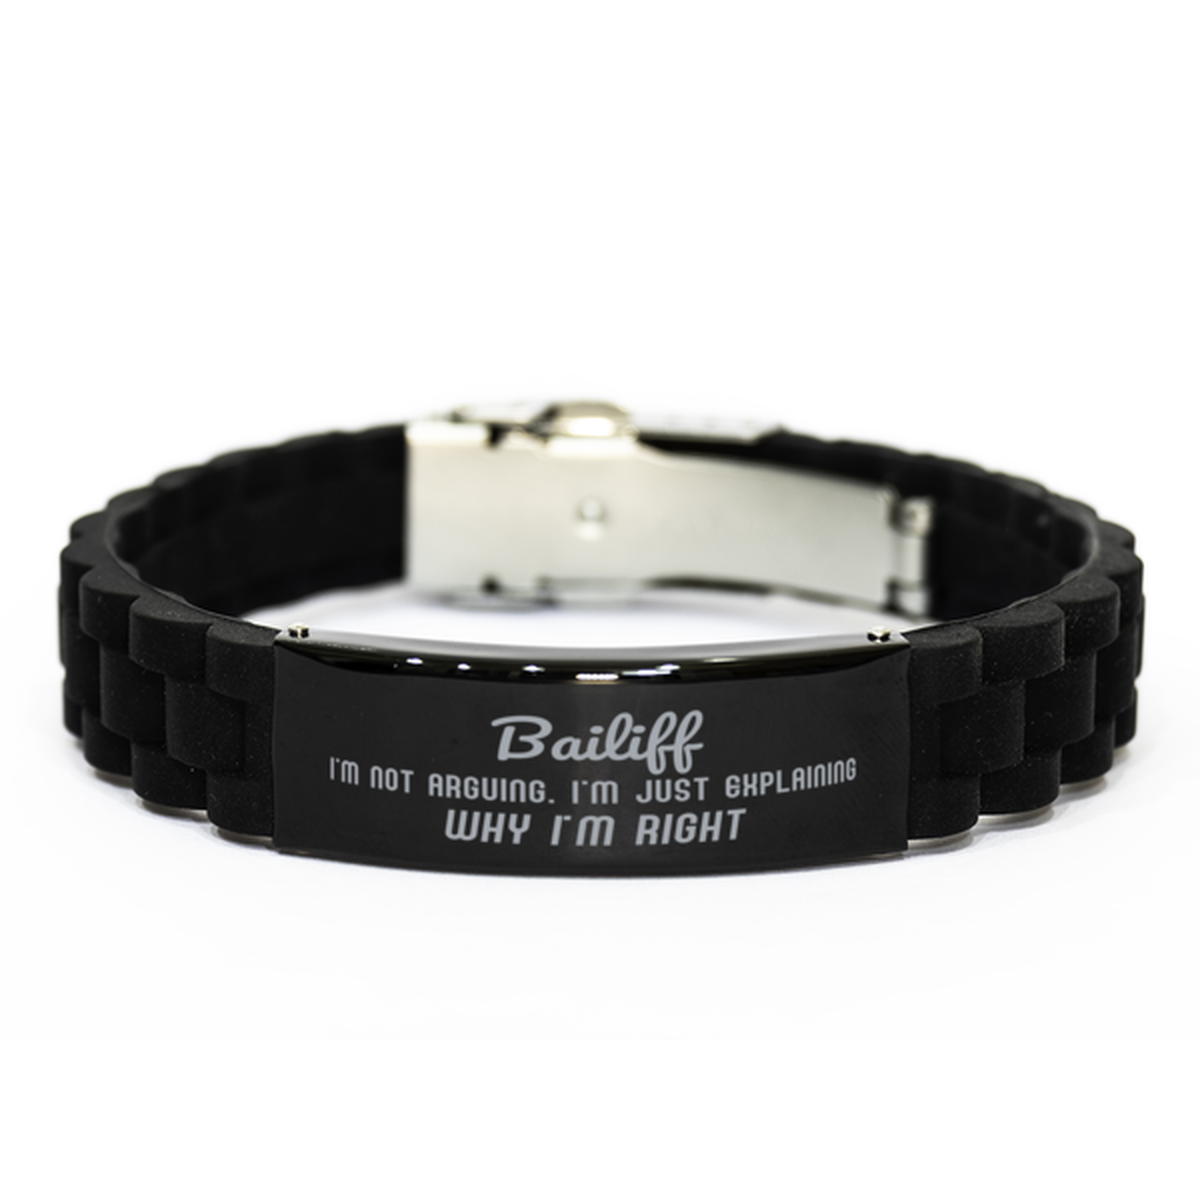 Bailiff I'm not Arguing. I'm Just Explaining Why I'm RIGHT Black Glidelock Clasp Bracelet, Funny Saying Quote Bailiff Gifts For Bailiff Graduation Birthday Christmas Gifts for Men Women Coworker